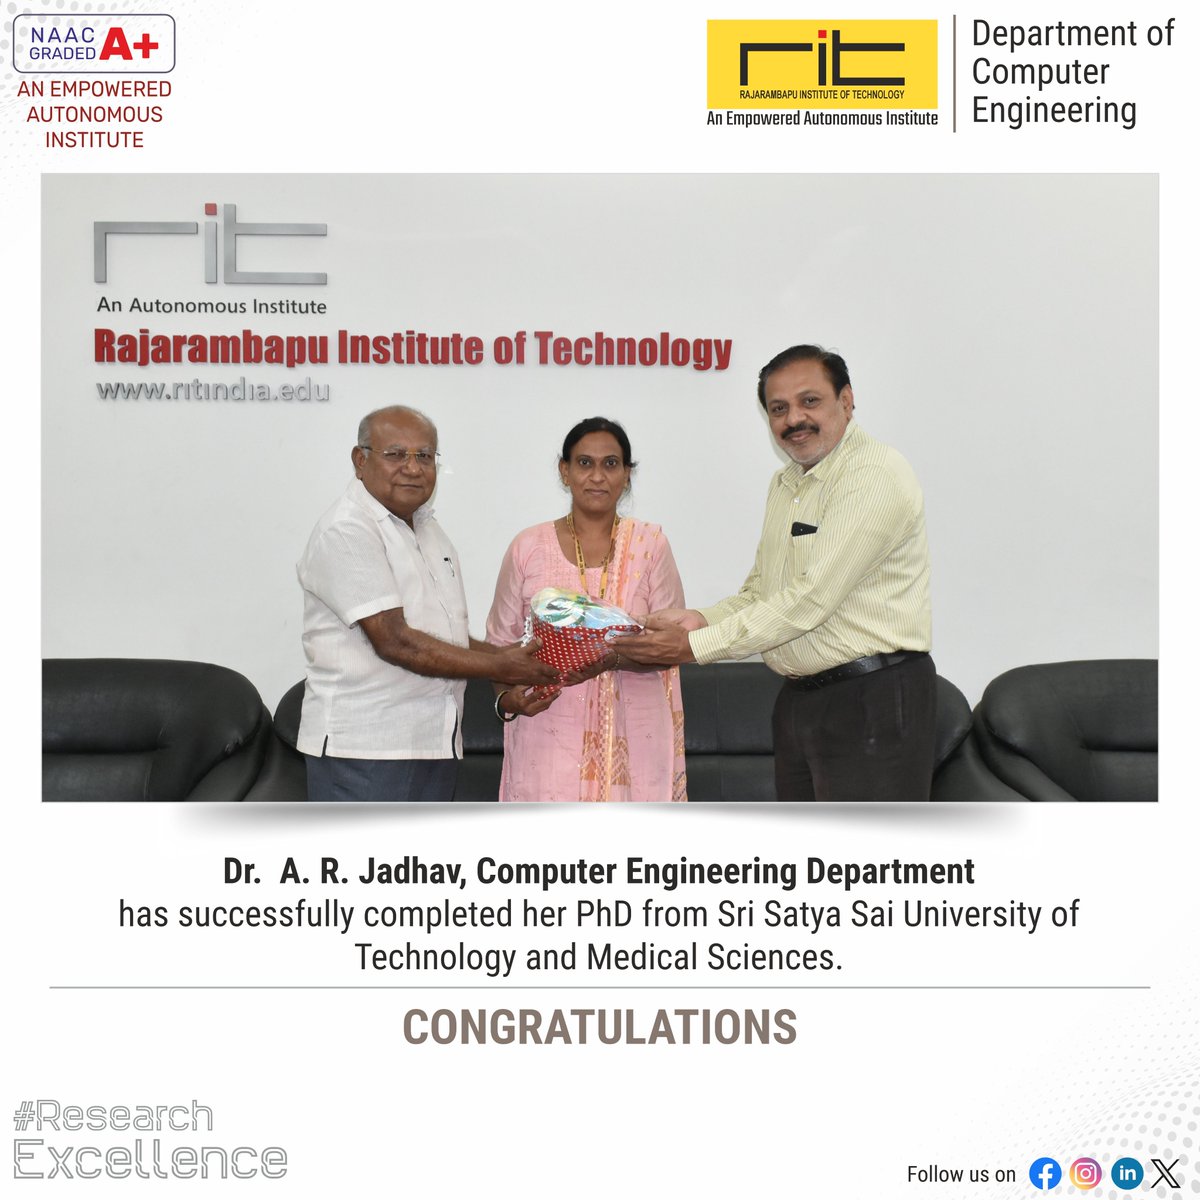 We are proud to announce that Dr.  A. R. Jadhav from our Computer Engineering Department has successfully completed her PhD from Sri Satya Sai University of Technology and Medical Sciences. 
#PhDCompleted #ResearchExcellence #DatabaseManagementSystems #ComputerEngineering